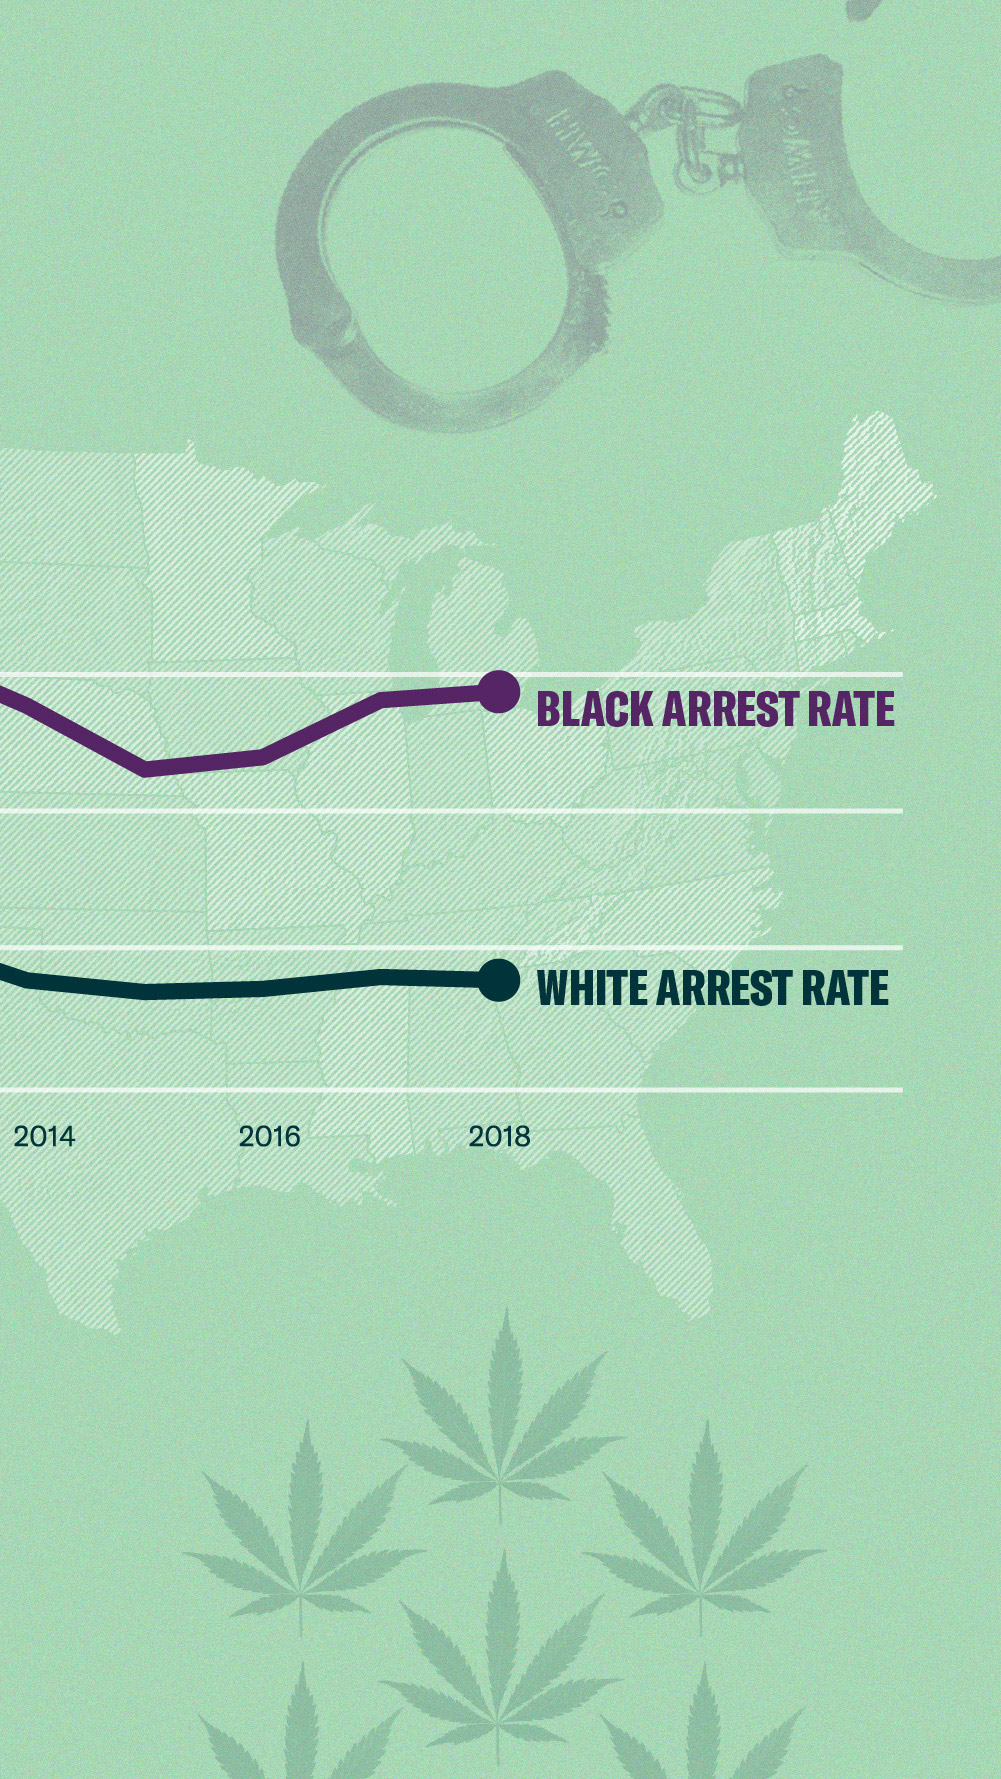 Graphic of black marijuana-related arrest rates compared to white arrest rates.